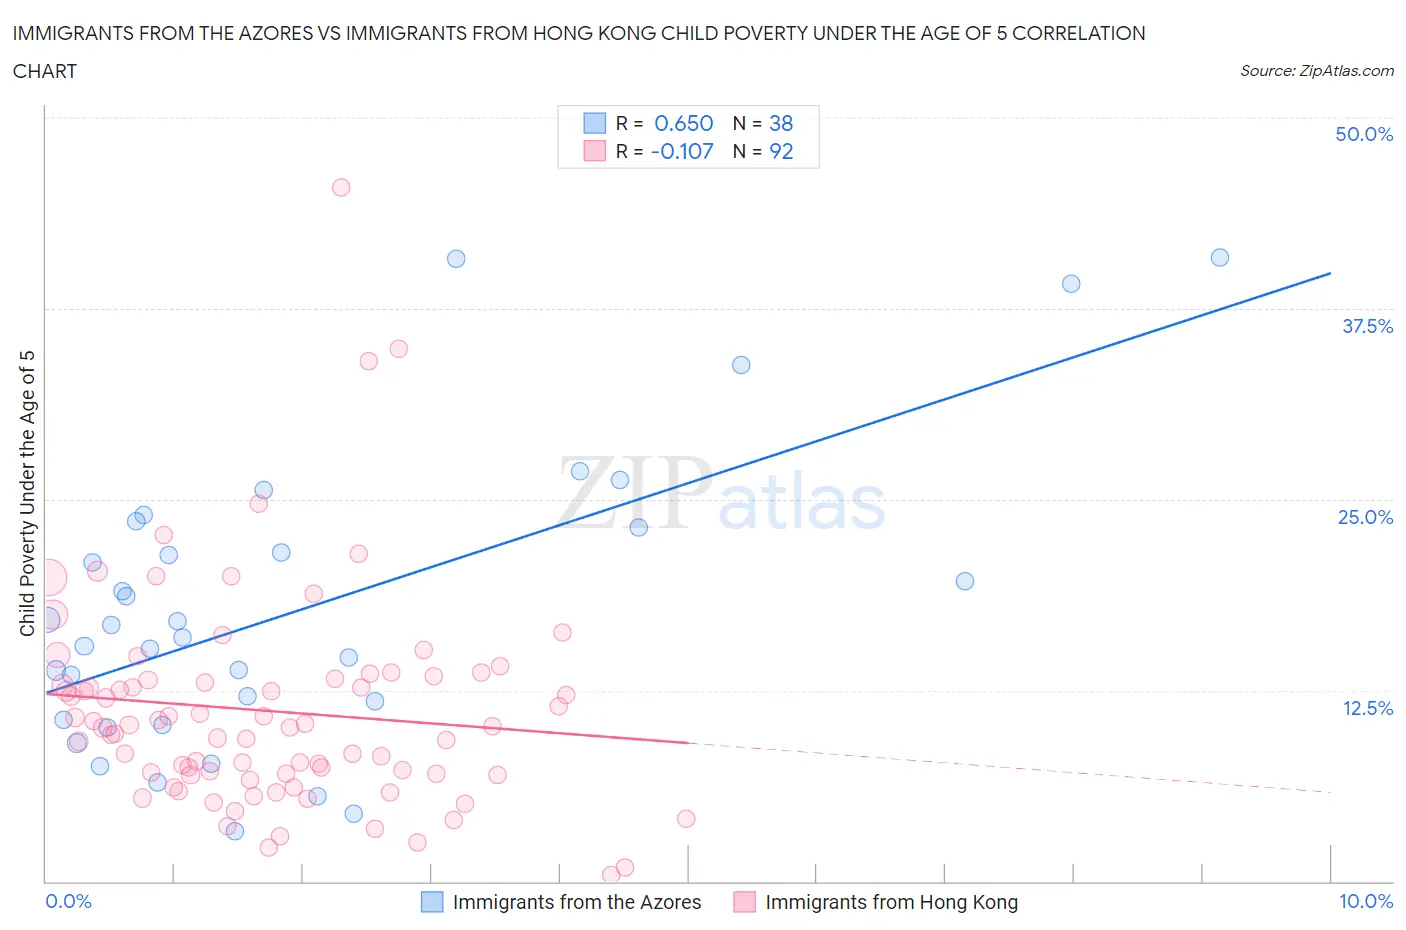 Immigrants from the Azores vs Immigrants from Hong Kong Child Poverty Under the Age of 5